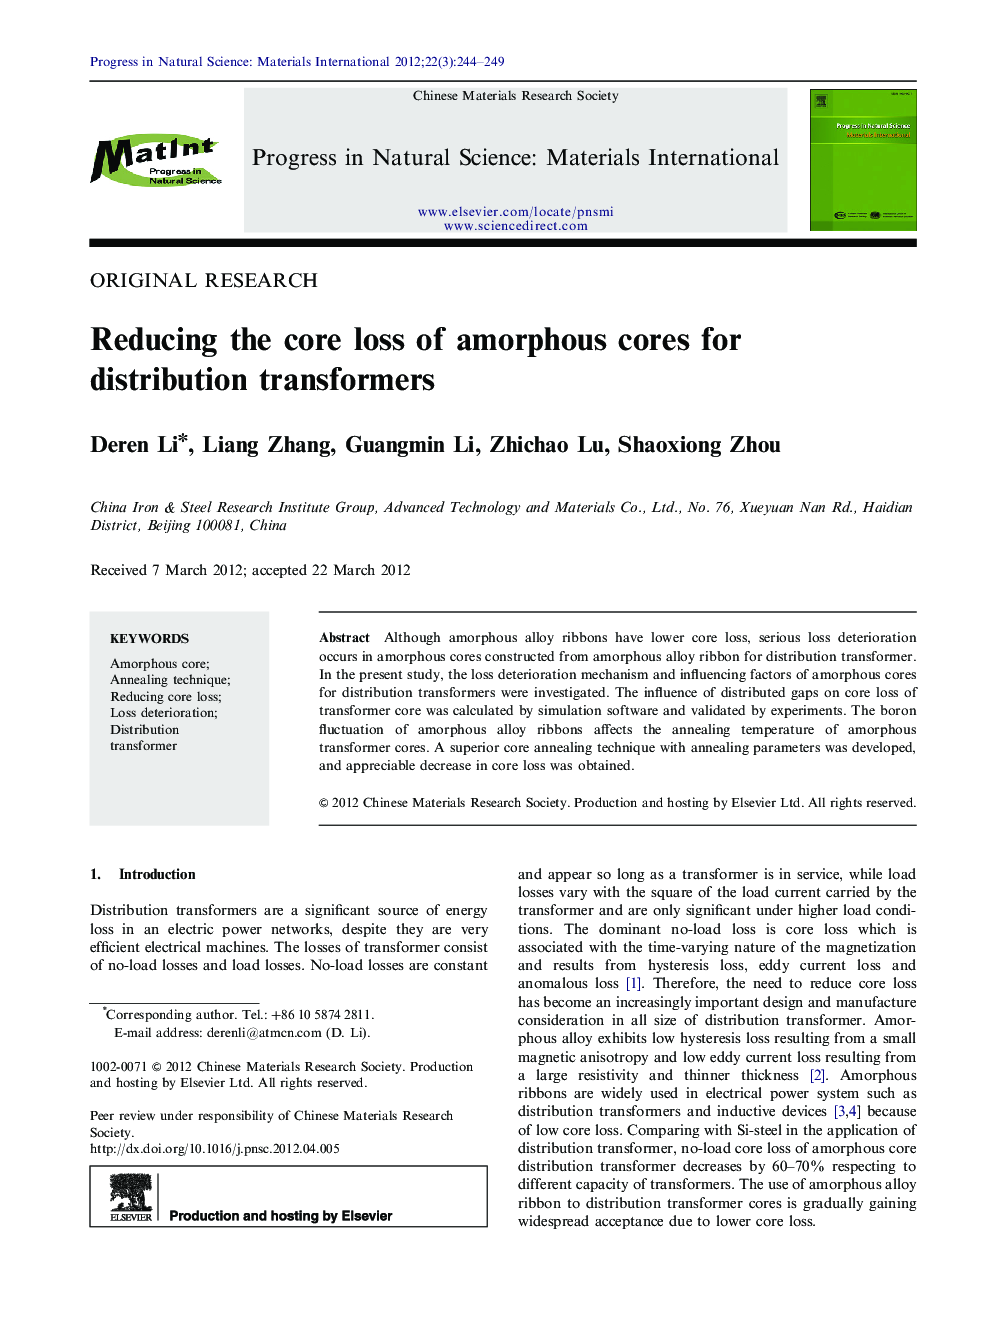 Reducing the core loss of amorphous cores for distribution transformers